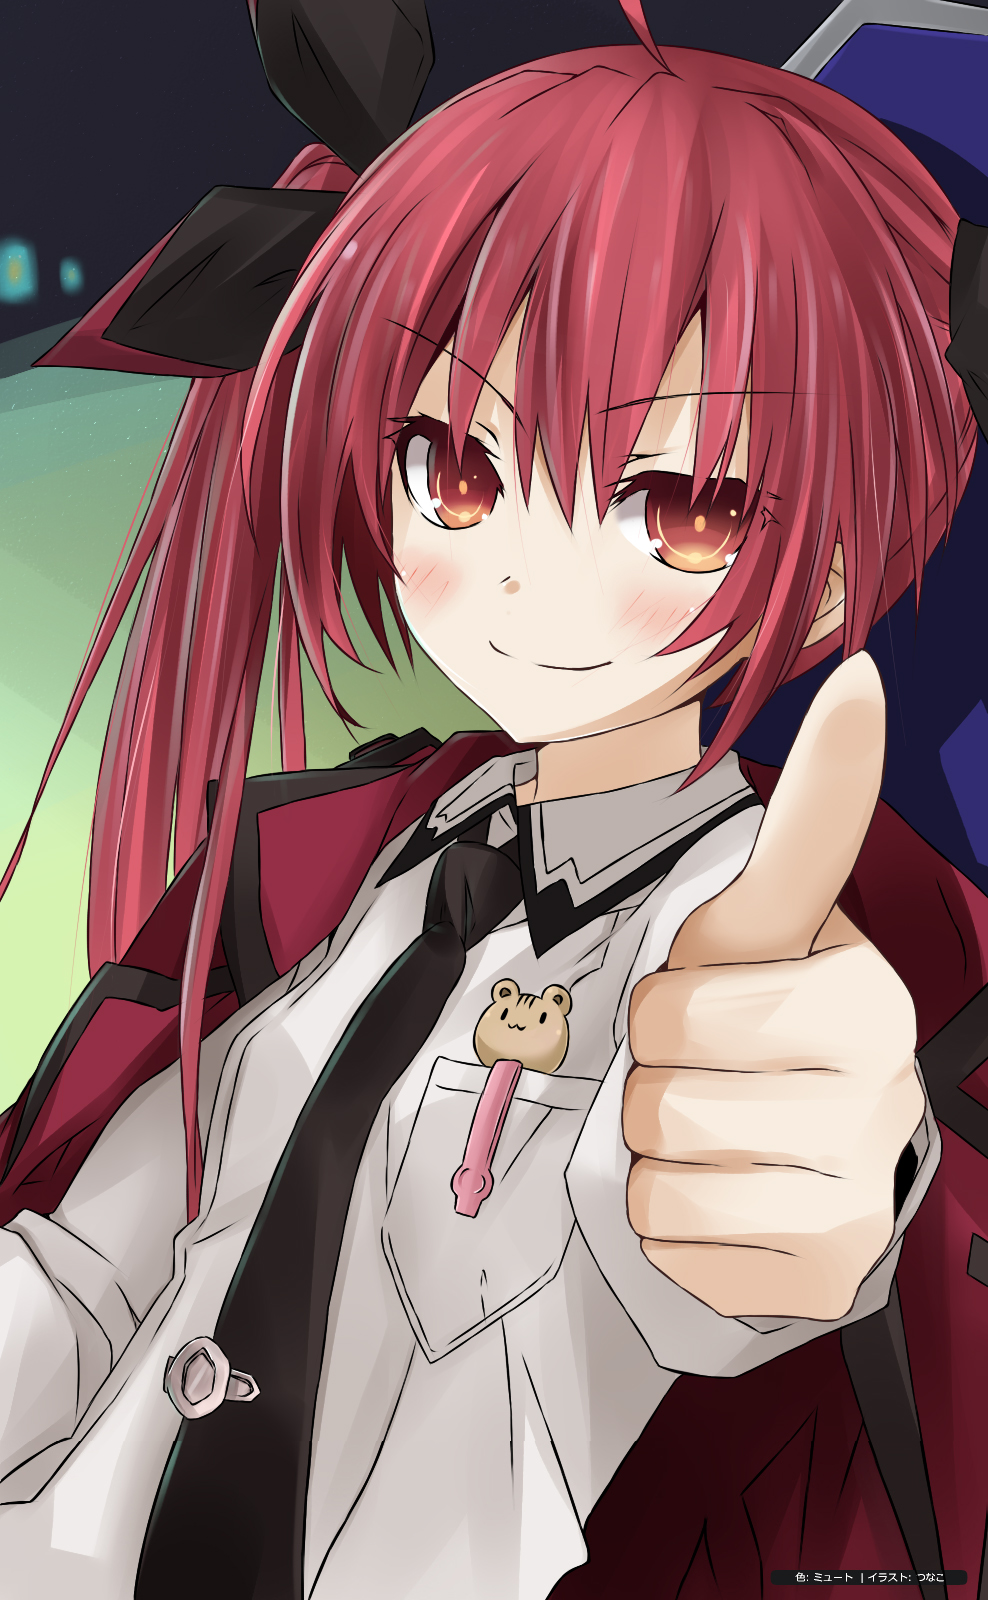 Best thumbs up in anime? : r/anime